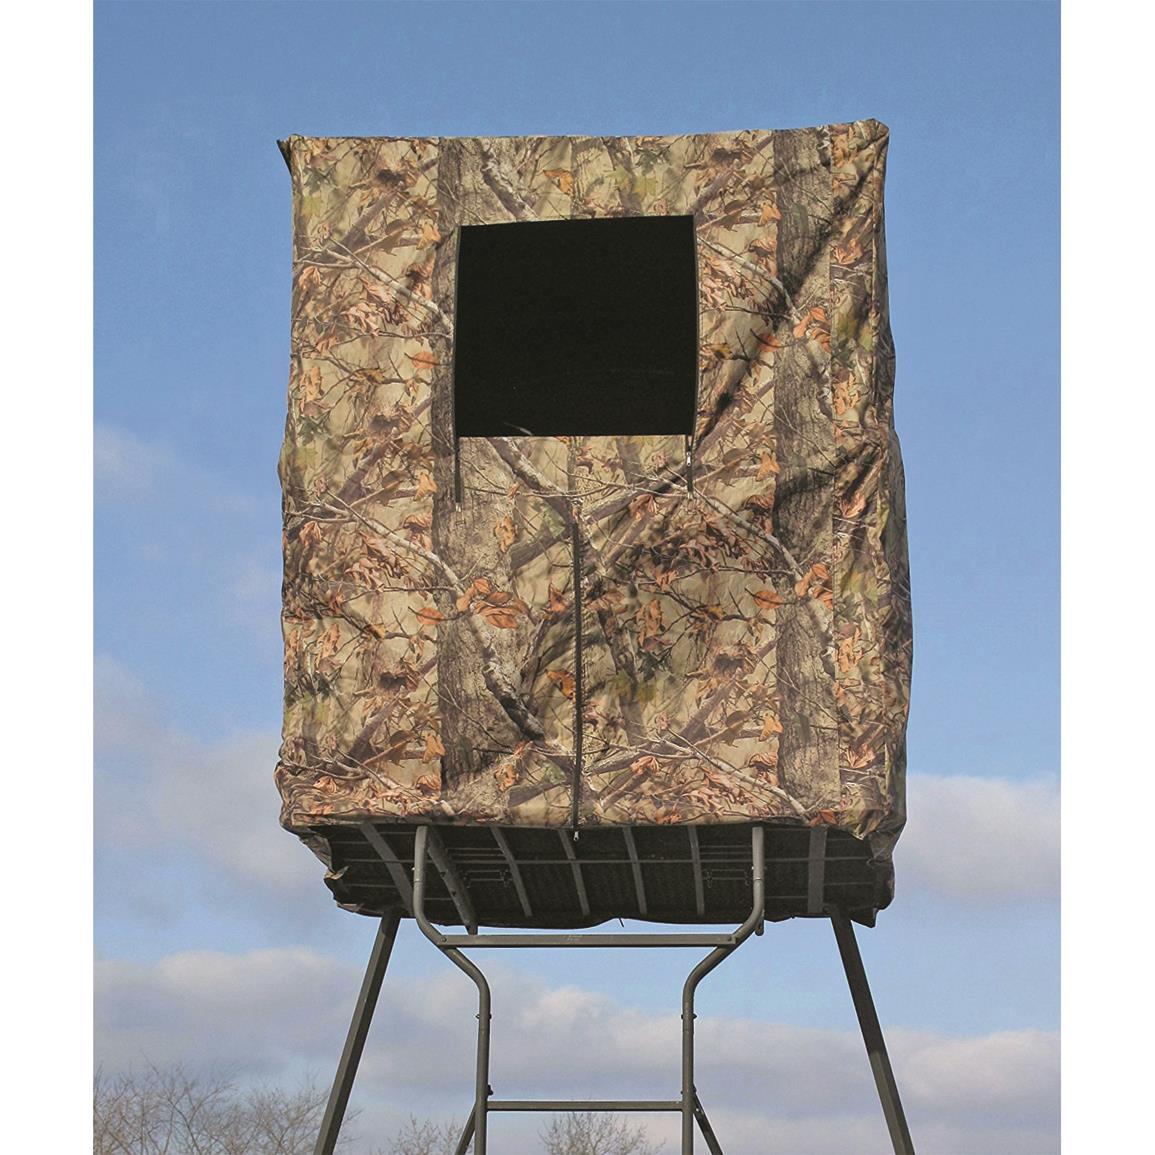 Guide Gear GGT11 12 ft Swivel Seat Tripod Deer Stand for sale online 